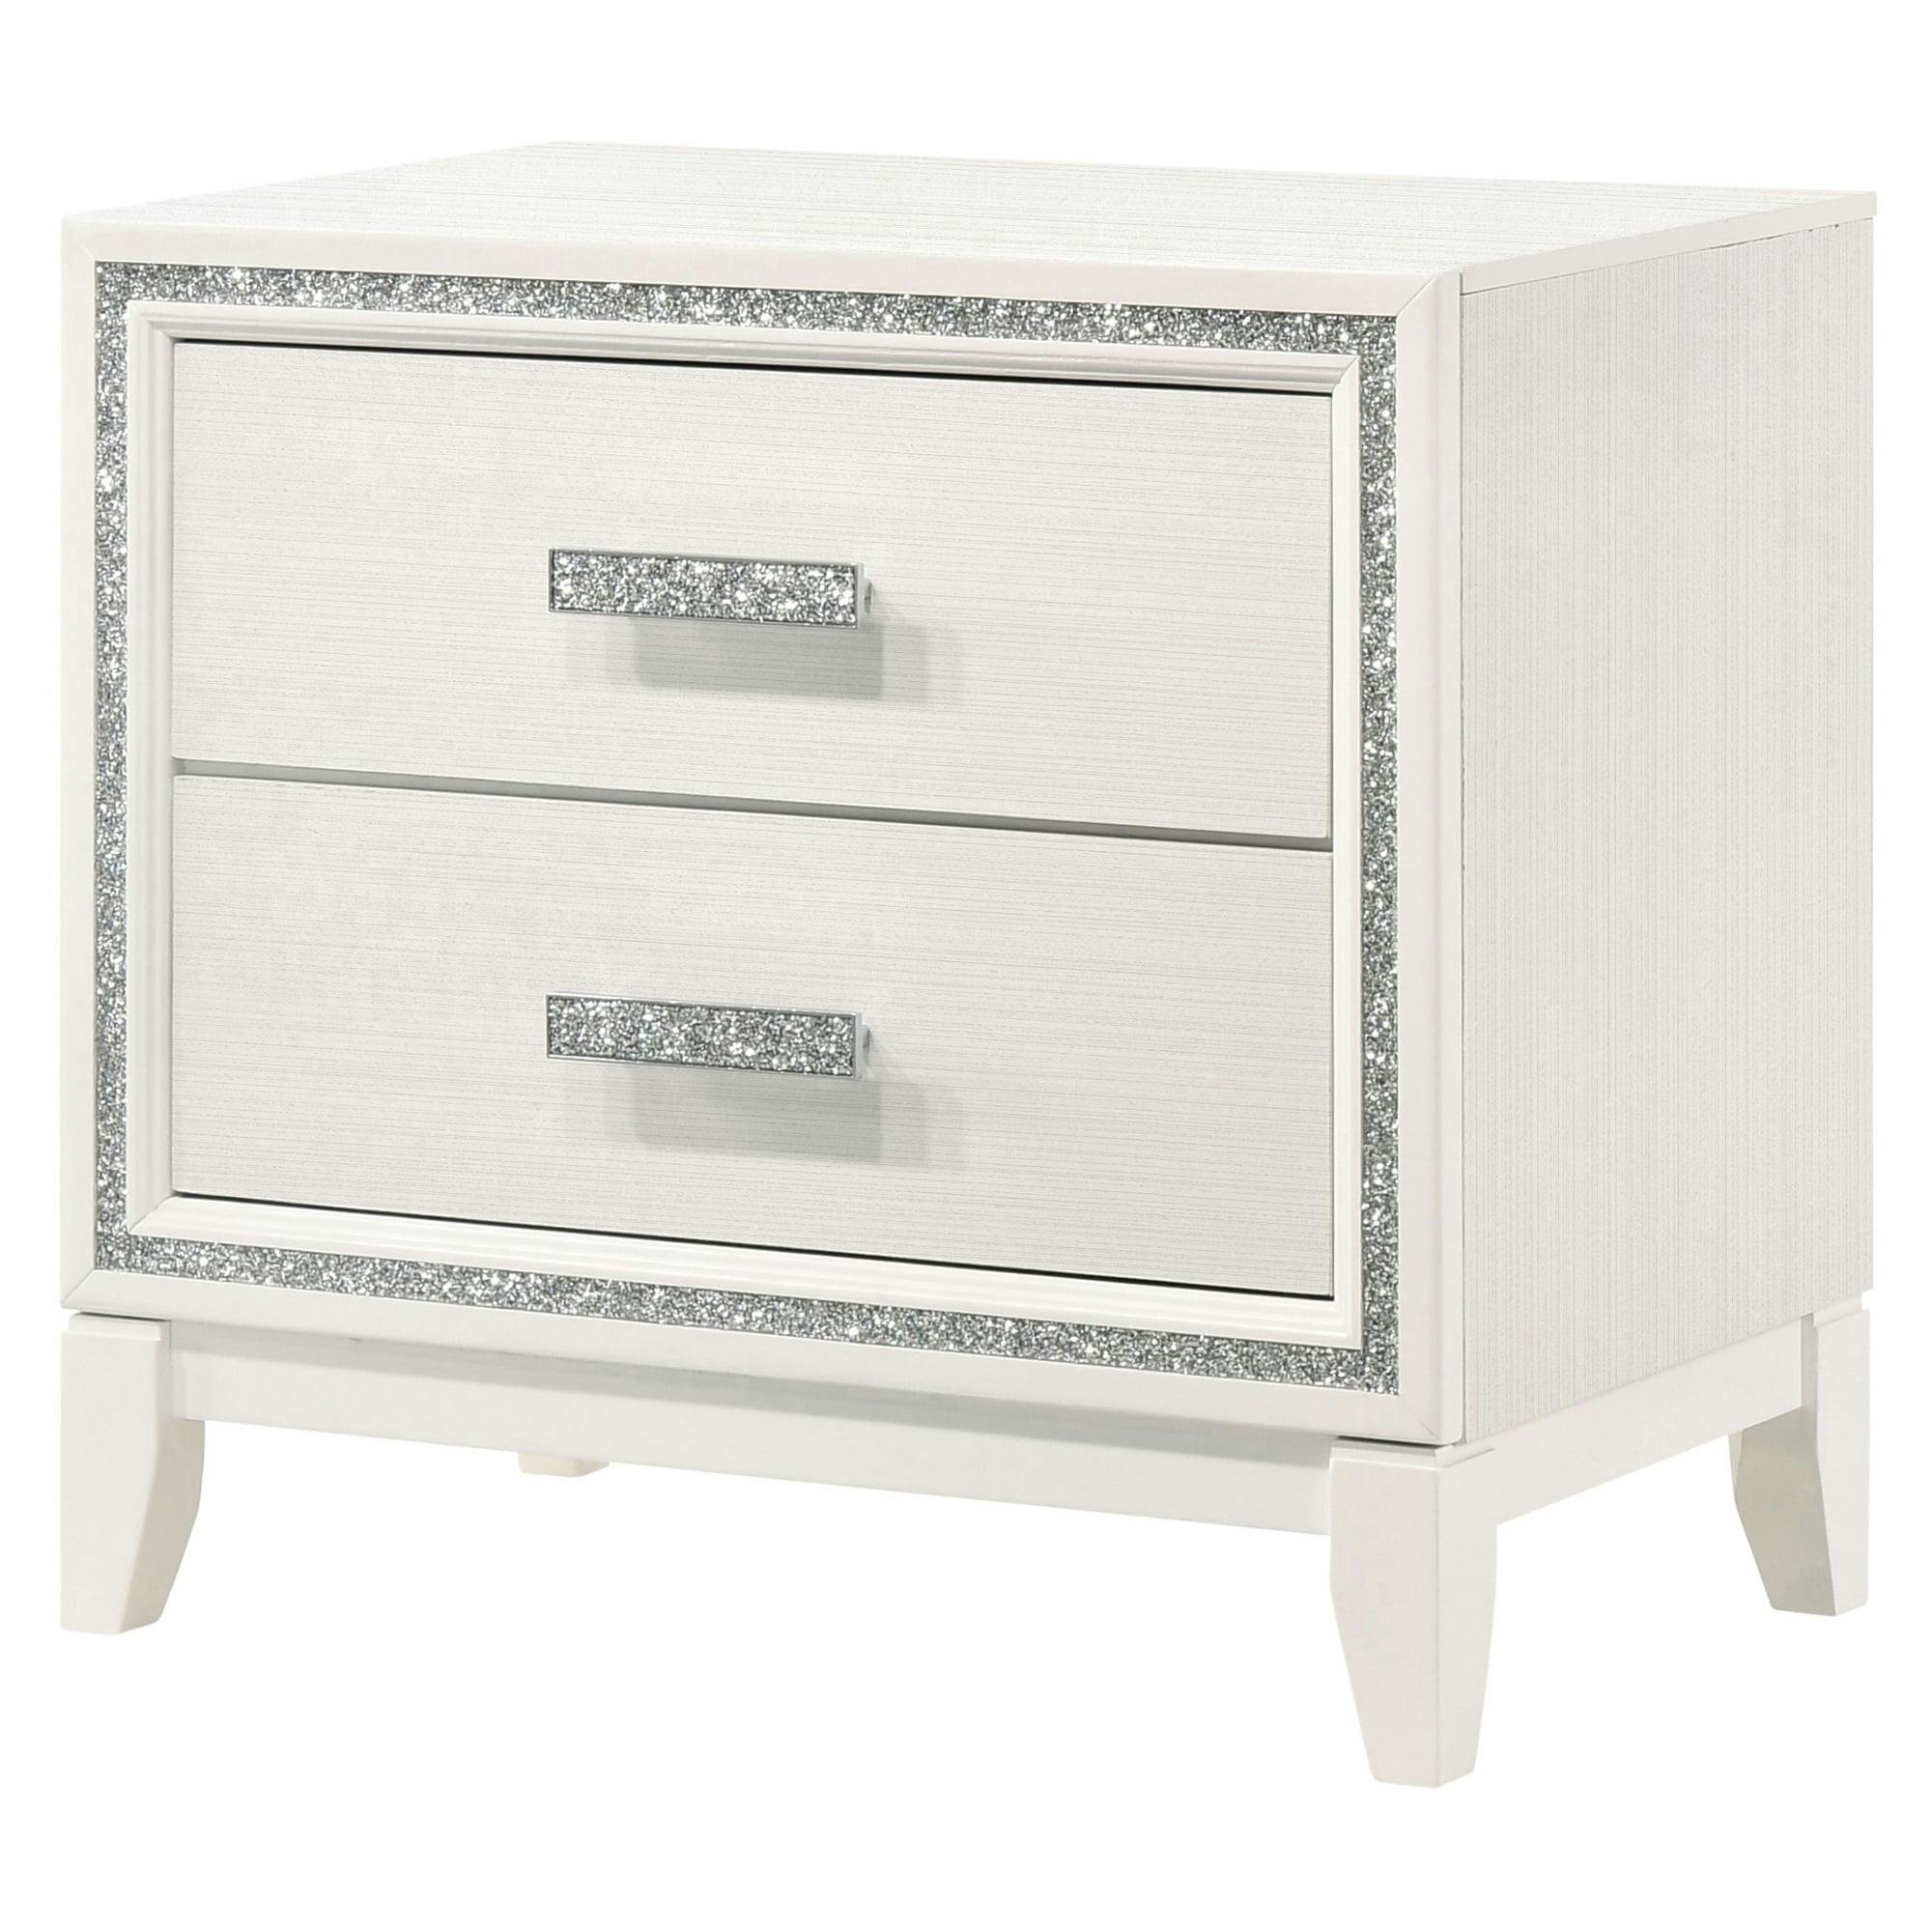 Haiden Glamorous White 2-Drawer Nightstand with Silver Accents